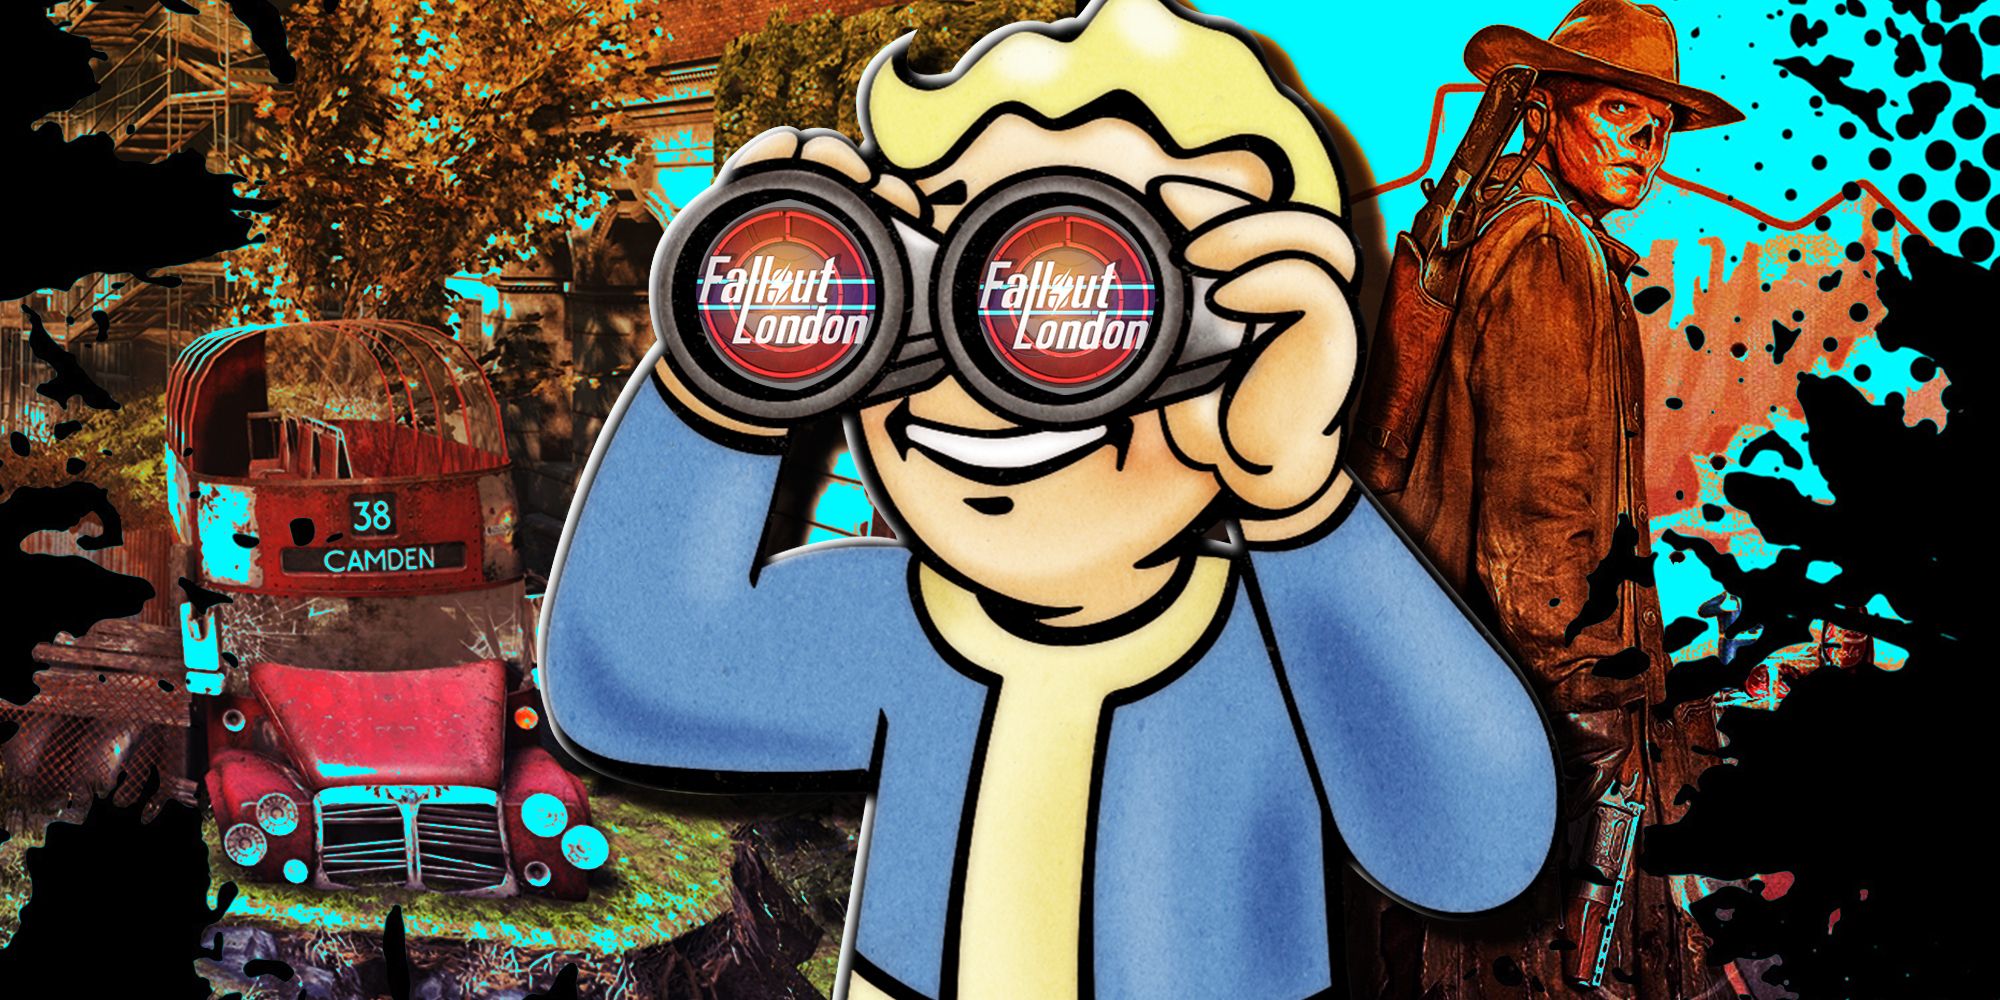 Fallout Vault Boy looking at the Fallout London logo through binoculars with Walton Goggins' ghoul in the background